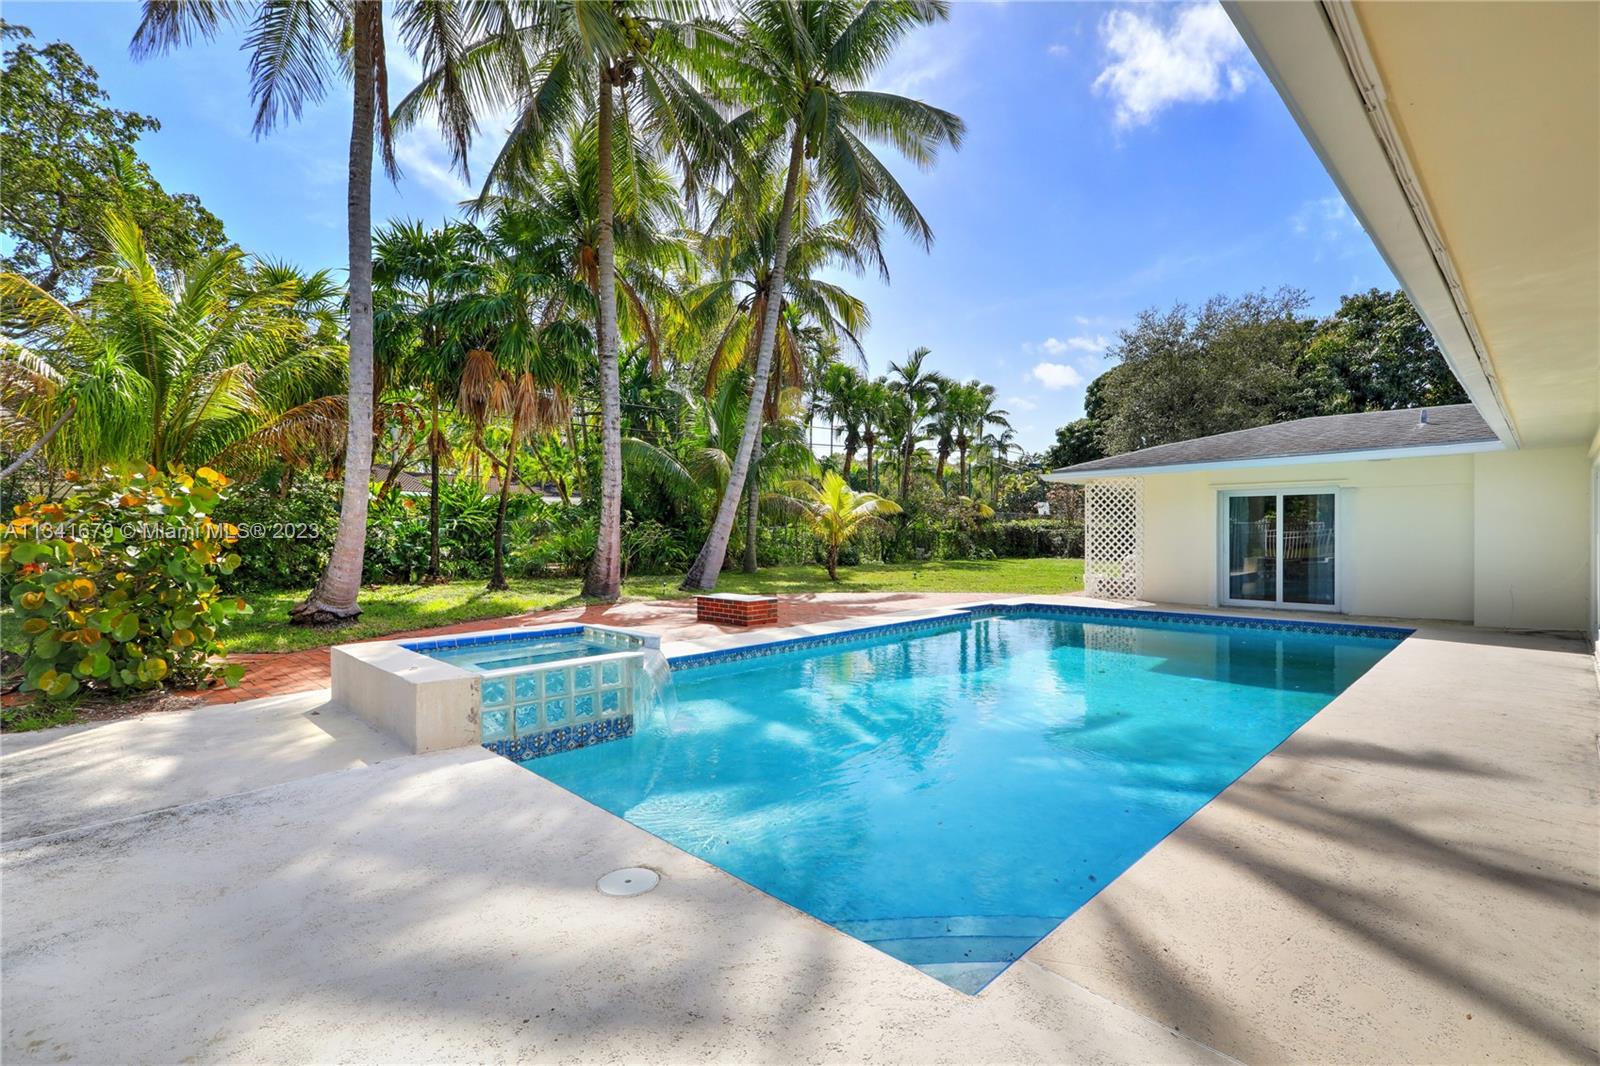 The hidden treasure! 3 bedrooms, 2 baths, pool home situated on a quite street of Pinecrest. "A" public and private schools. Impact windows and doors throughout. Clean, bright, beautiful! A must see!